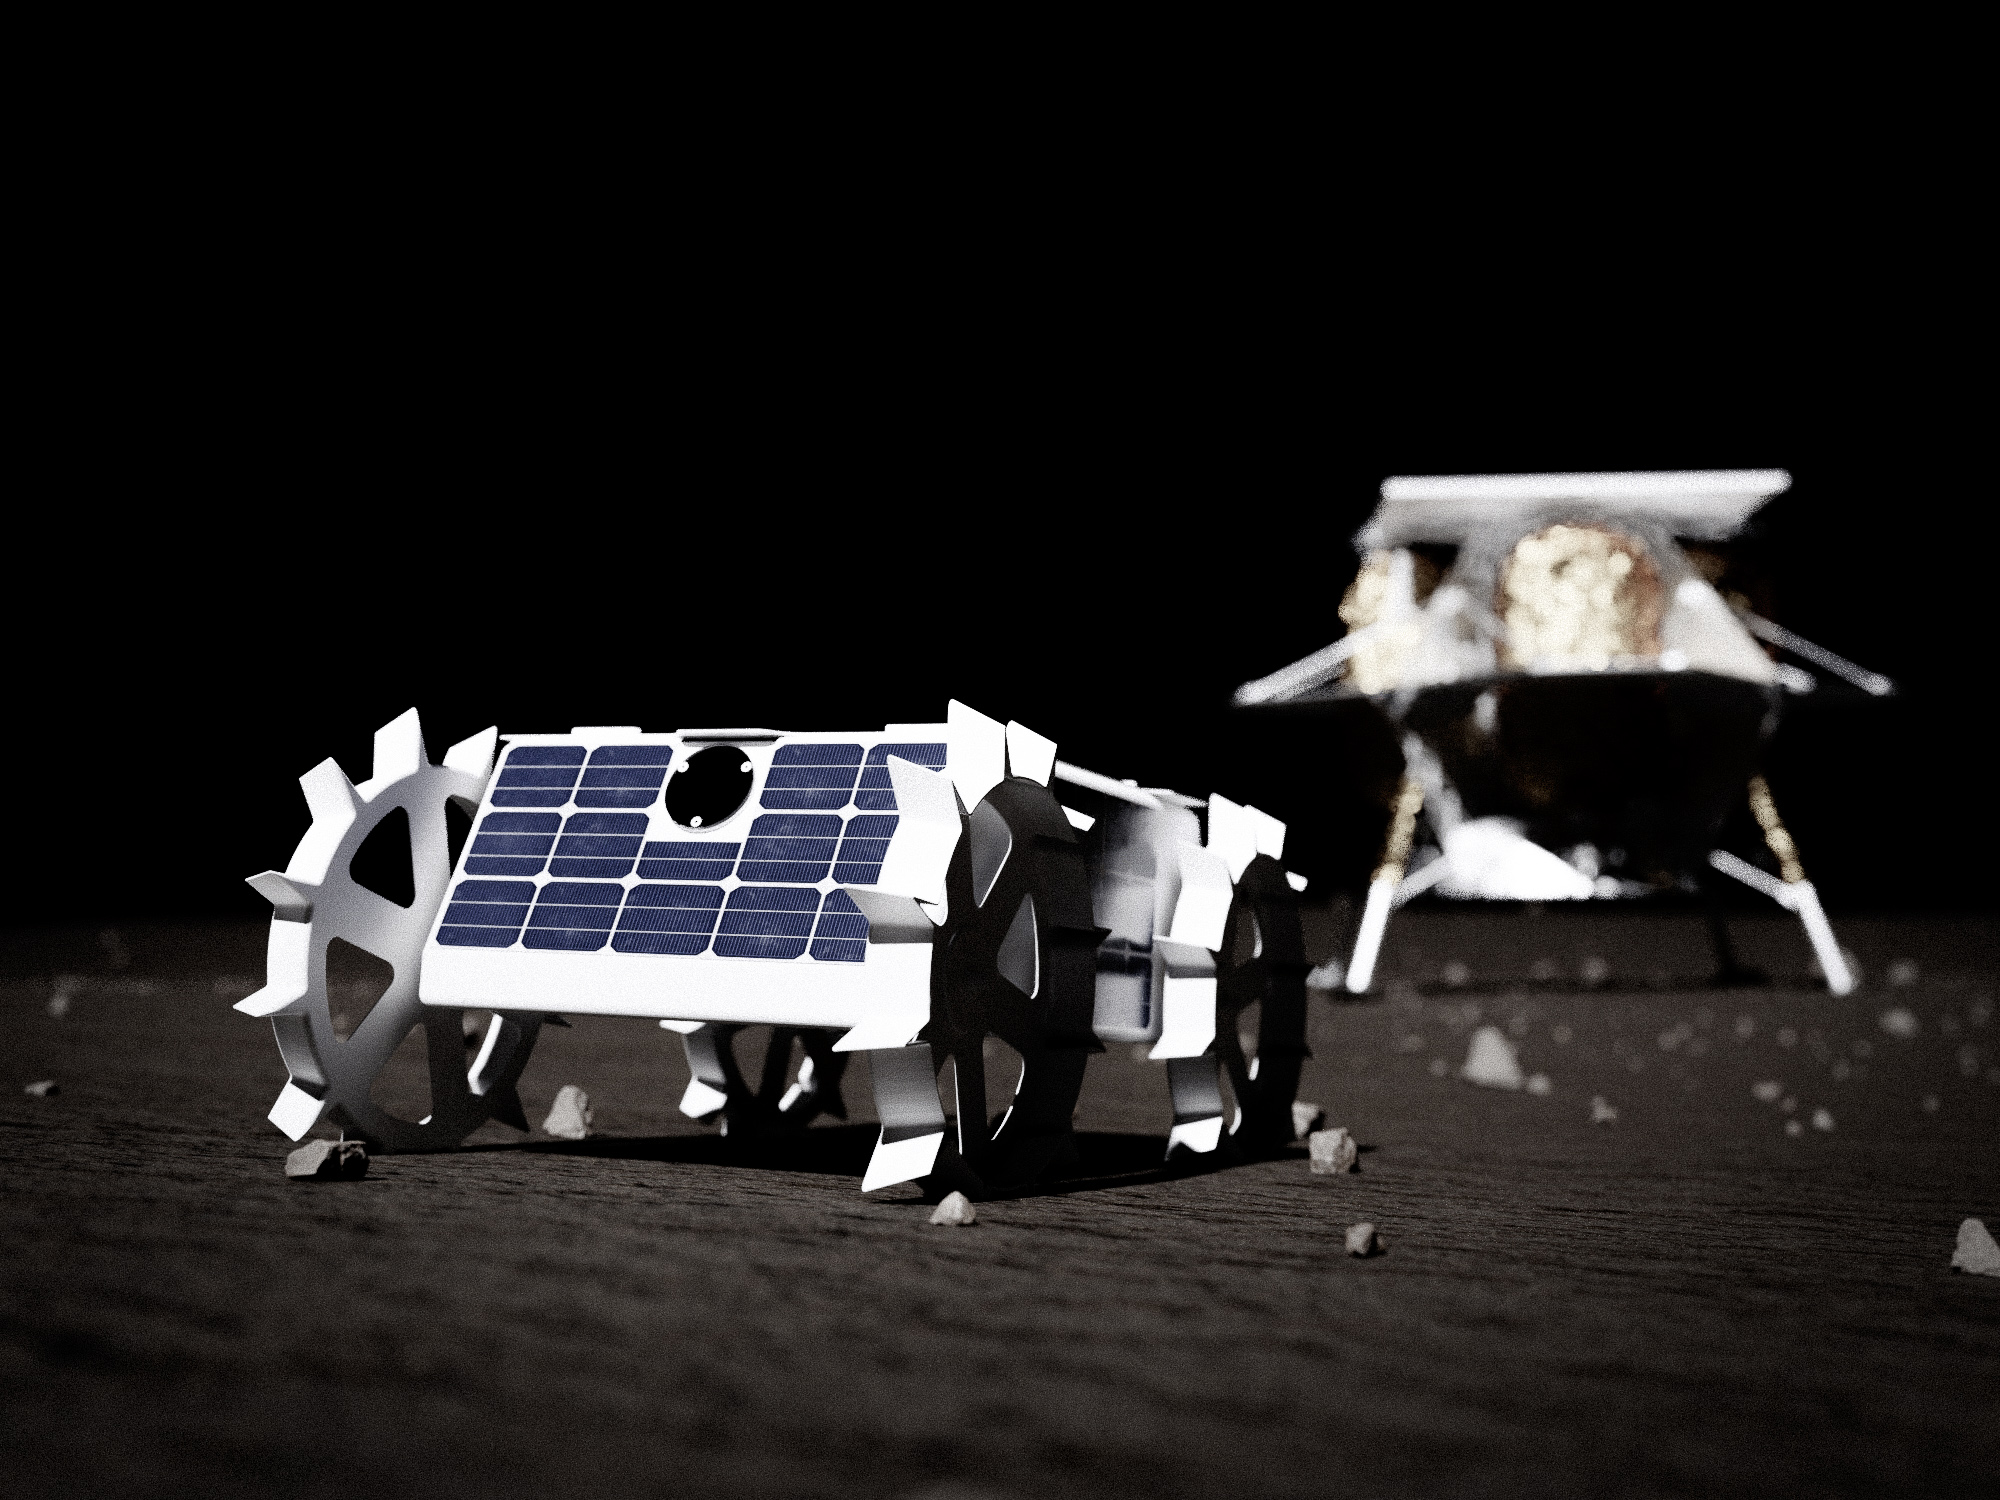 Astrobotic is one of 14 companies selected for NASA’s Tipping Point solicitation